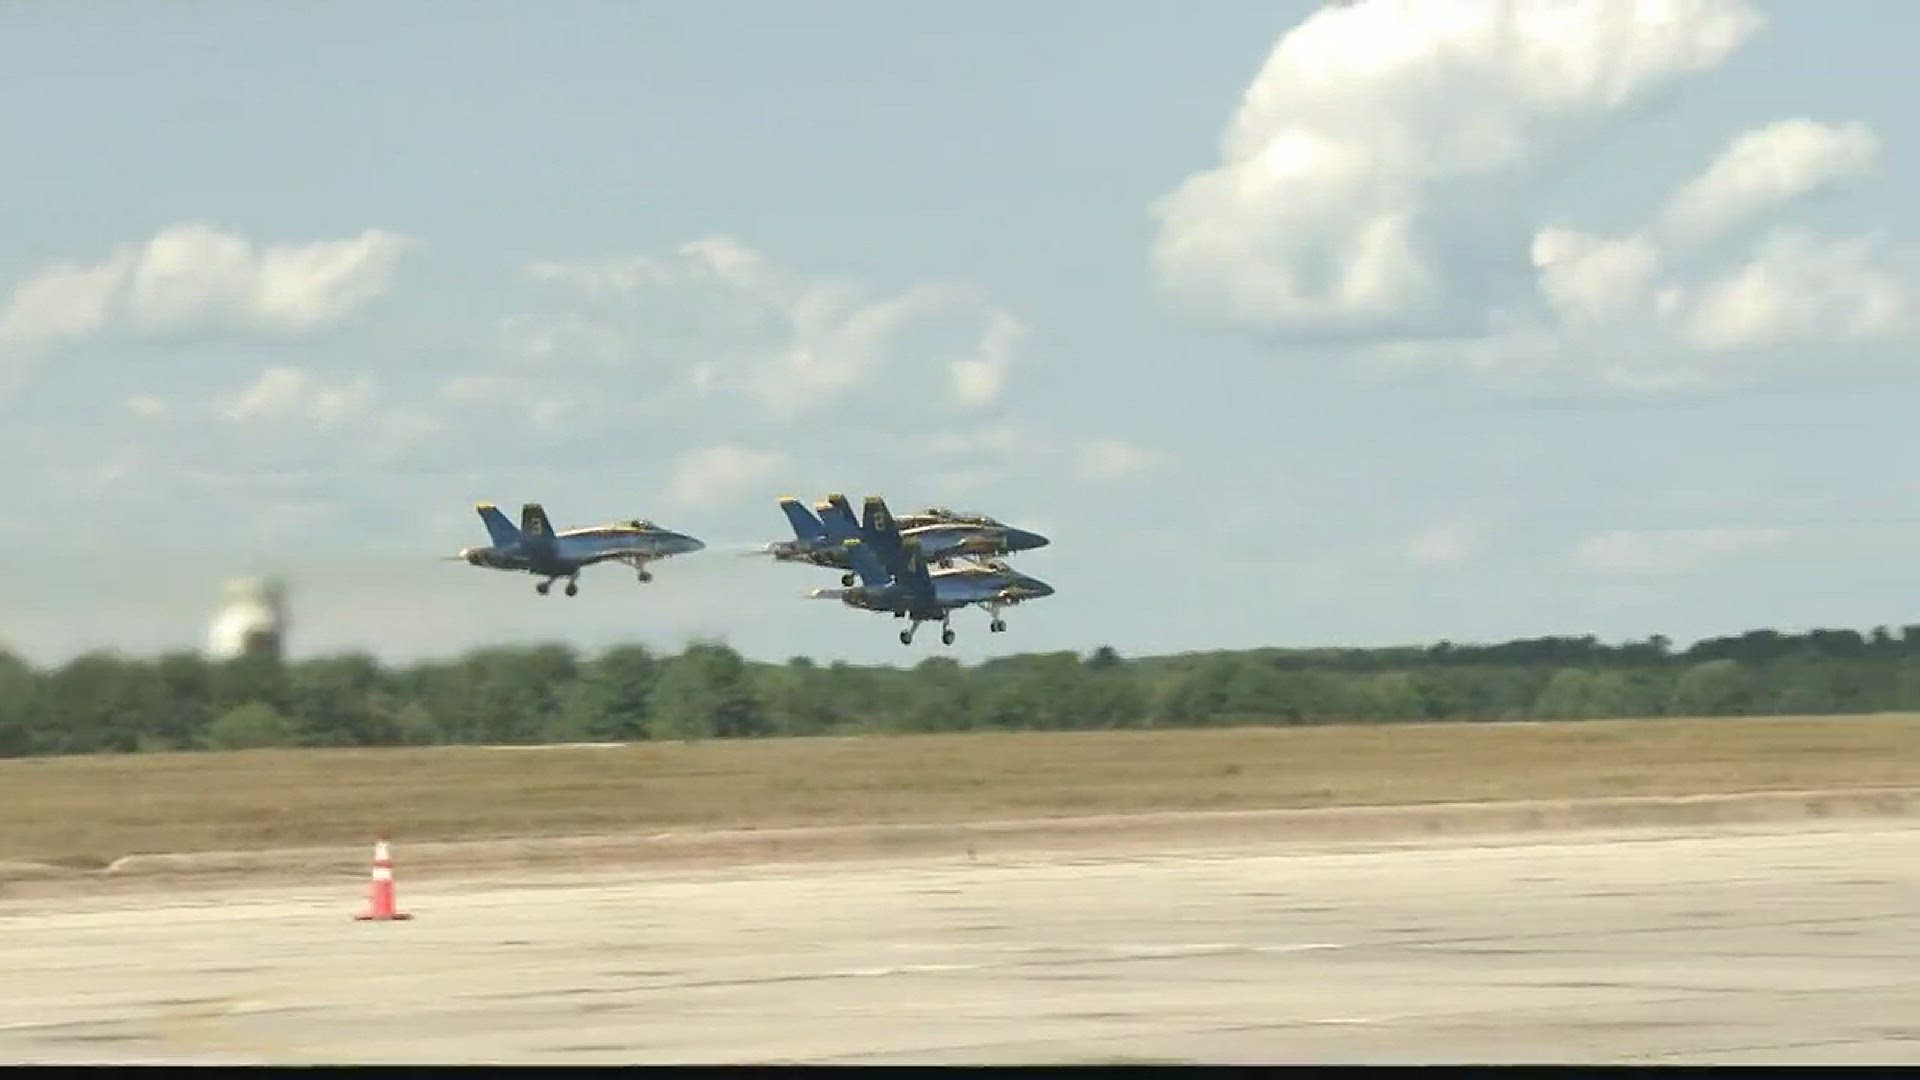 Gold star families to take in Blue Angels